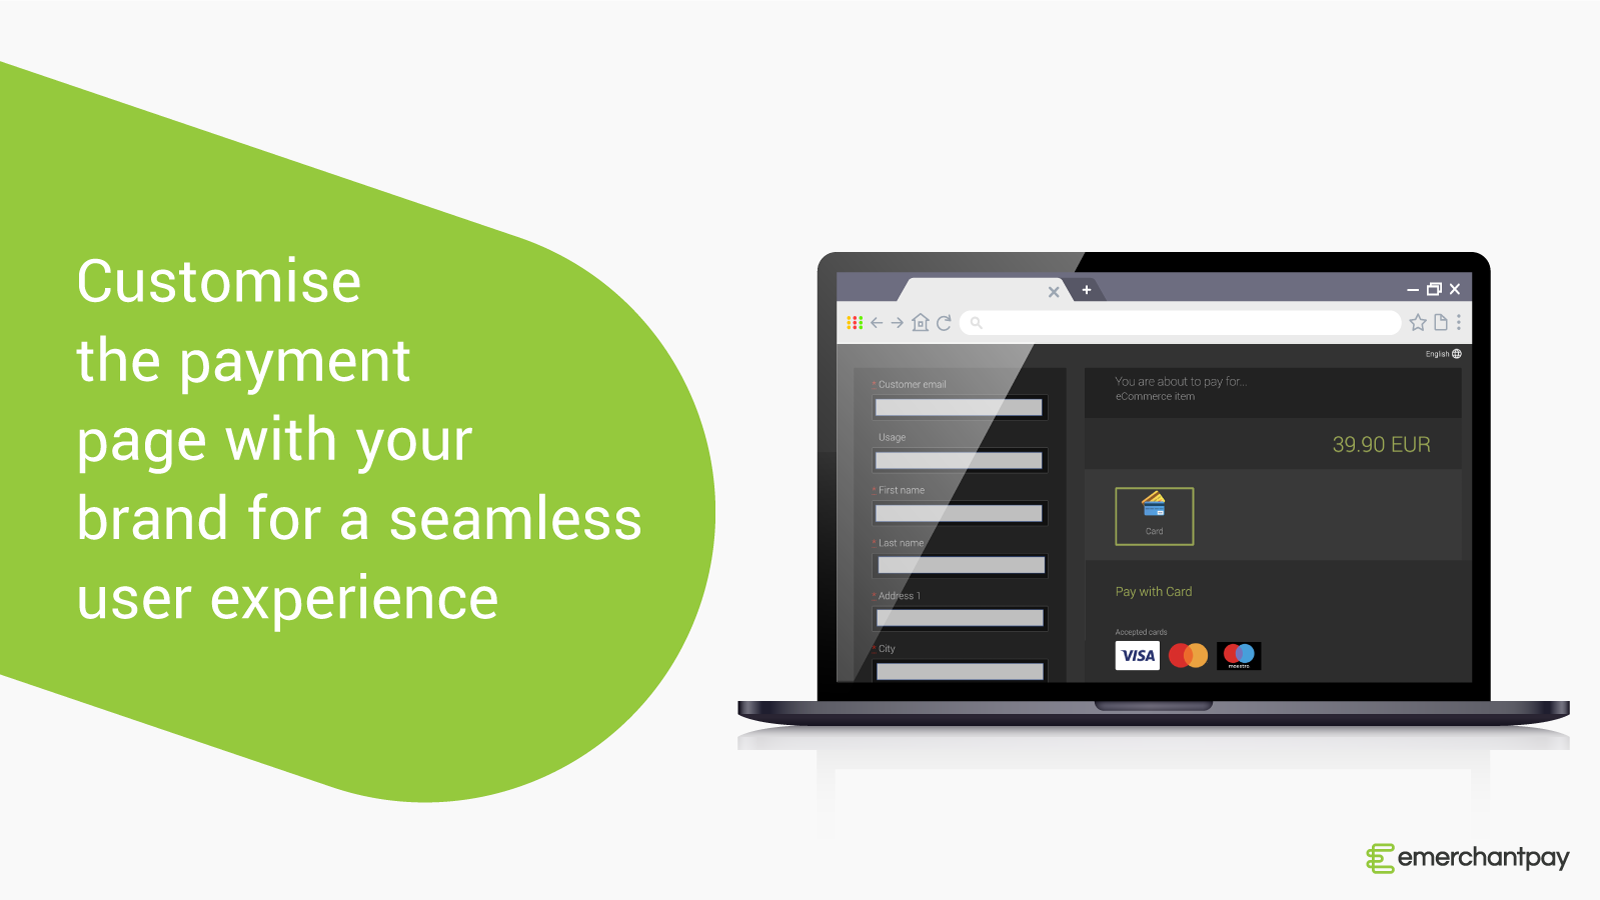 Customise your payment page